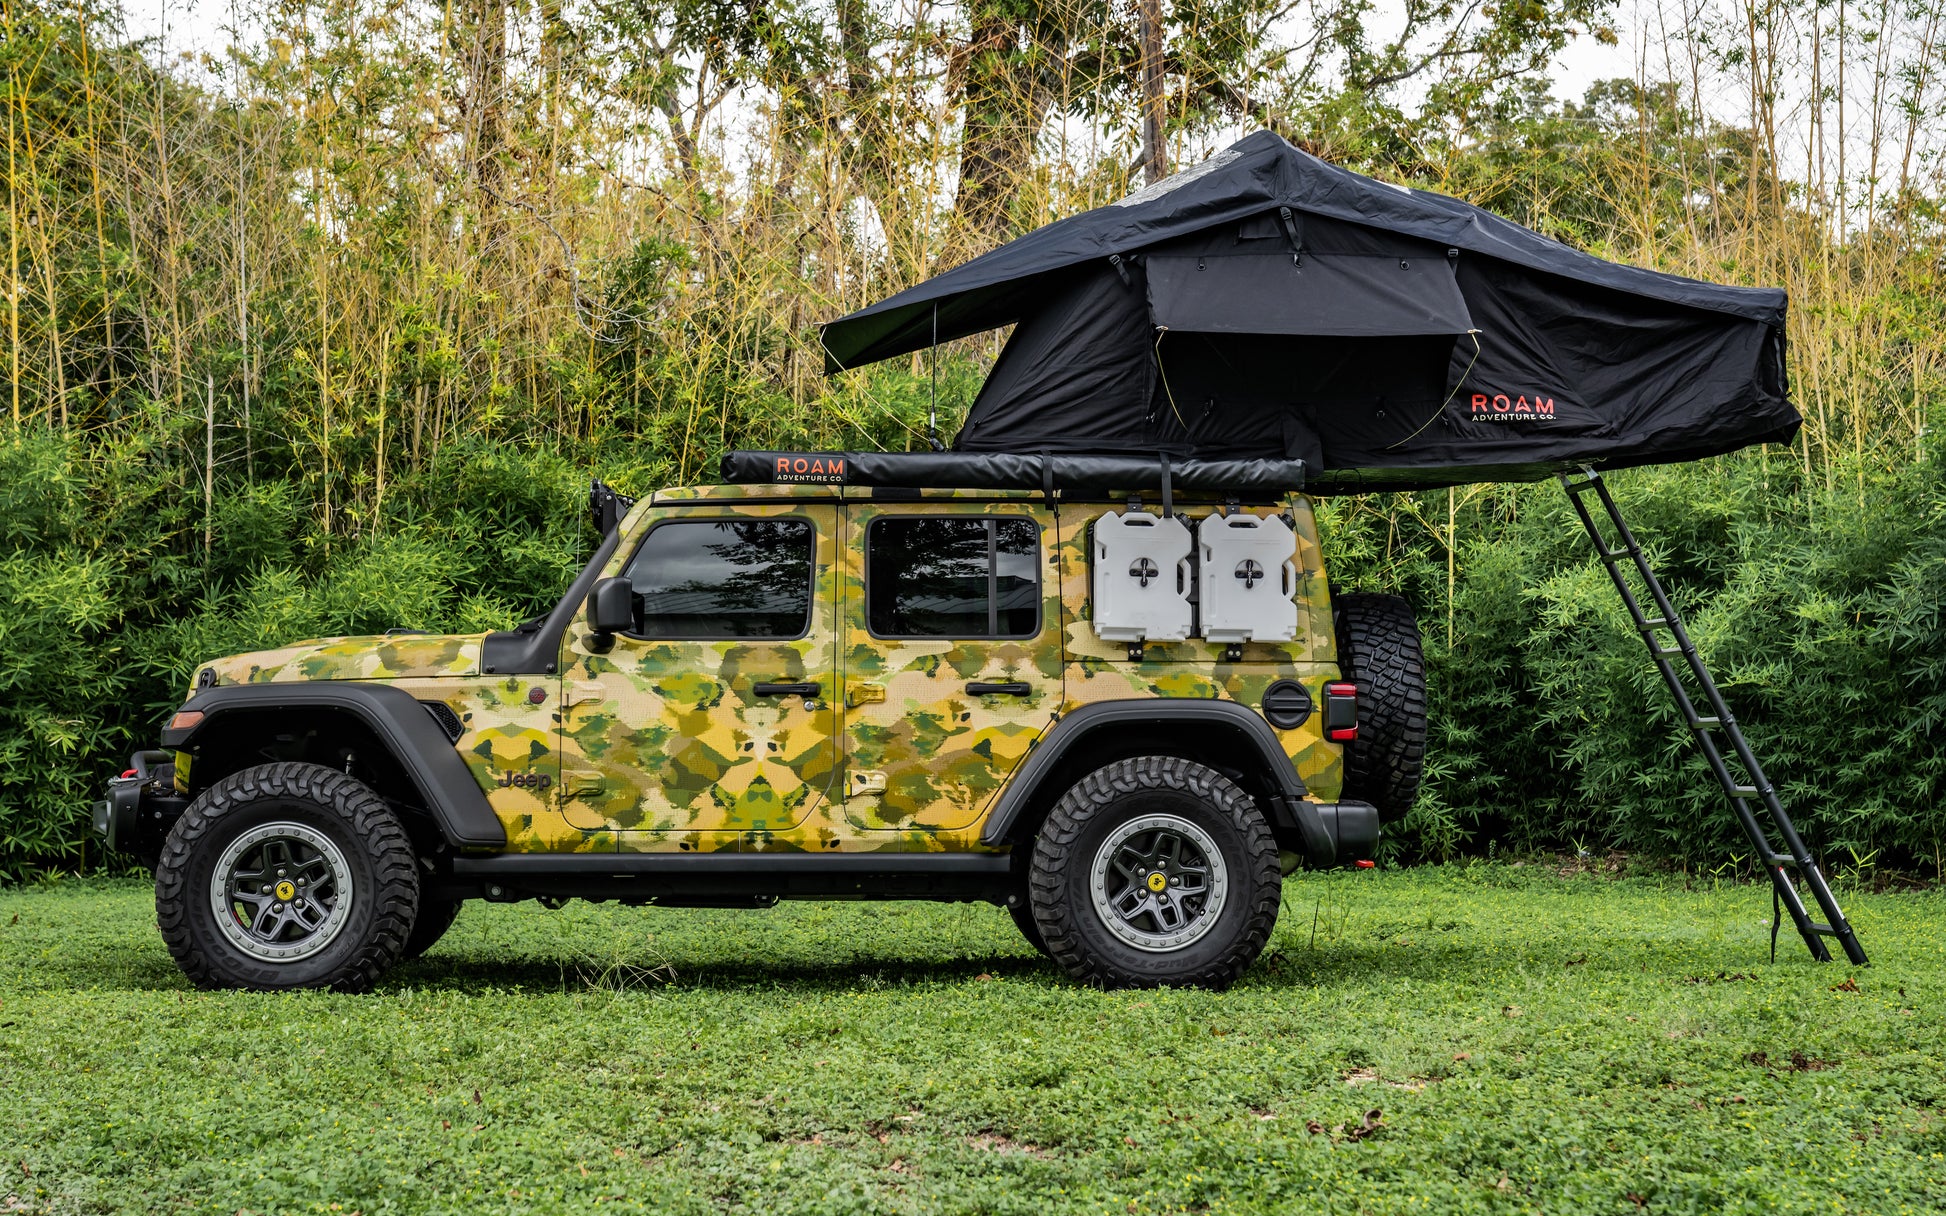 upgraded camo wrapped jeep wrangler rubicon for sale near austin bastrop texas at hawkes outdoors 2102512882